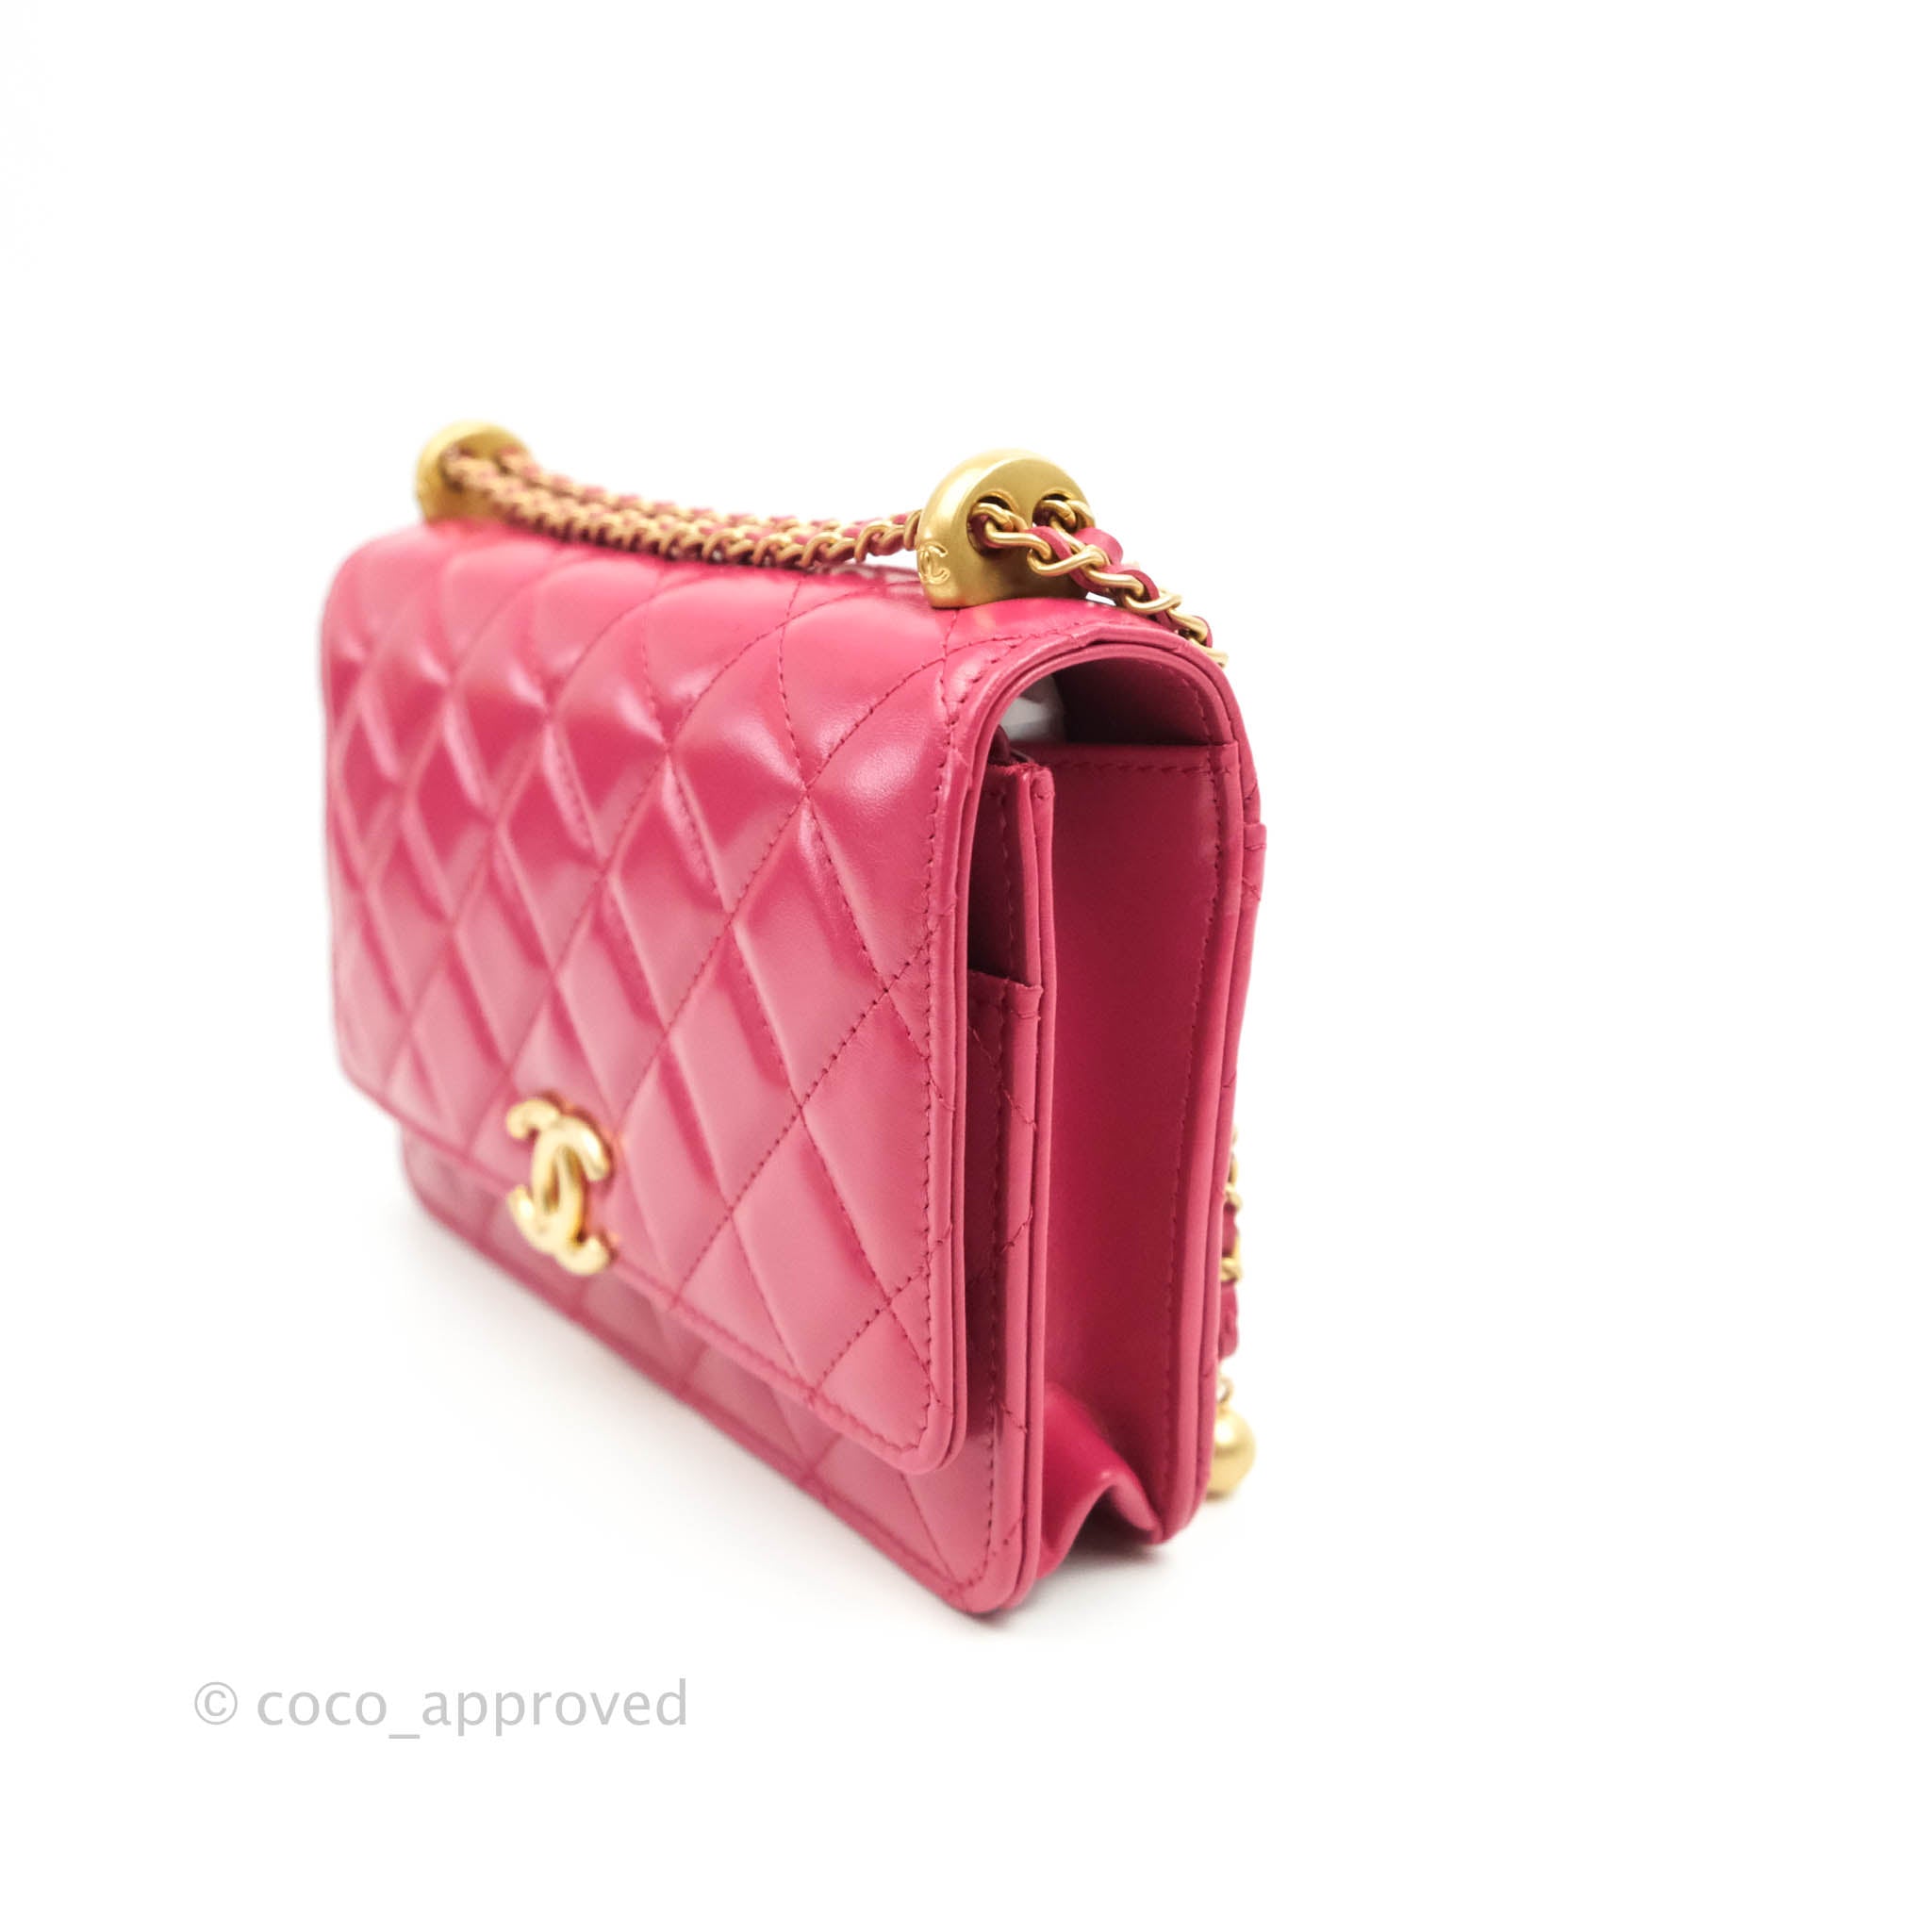 CHANEL Classic WOC (Wallet on Chain) with Adjustable Ball Chain